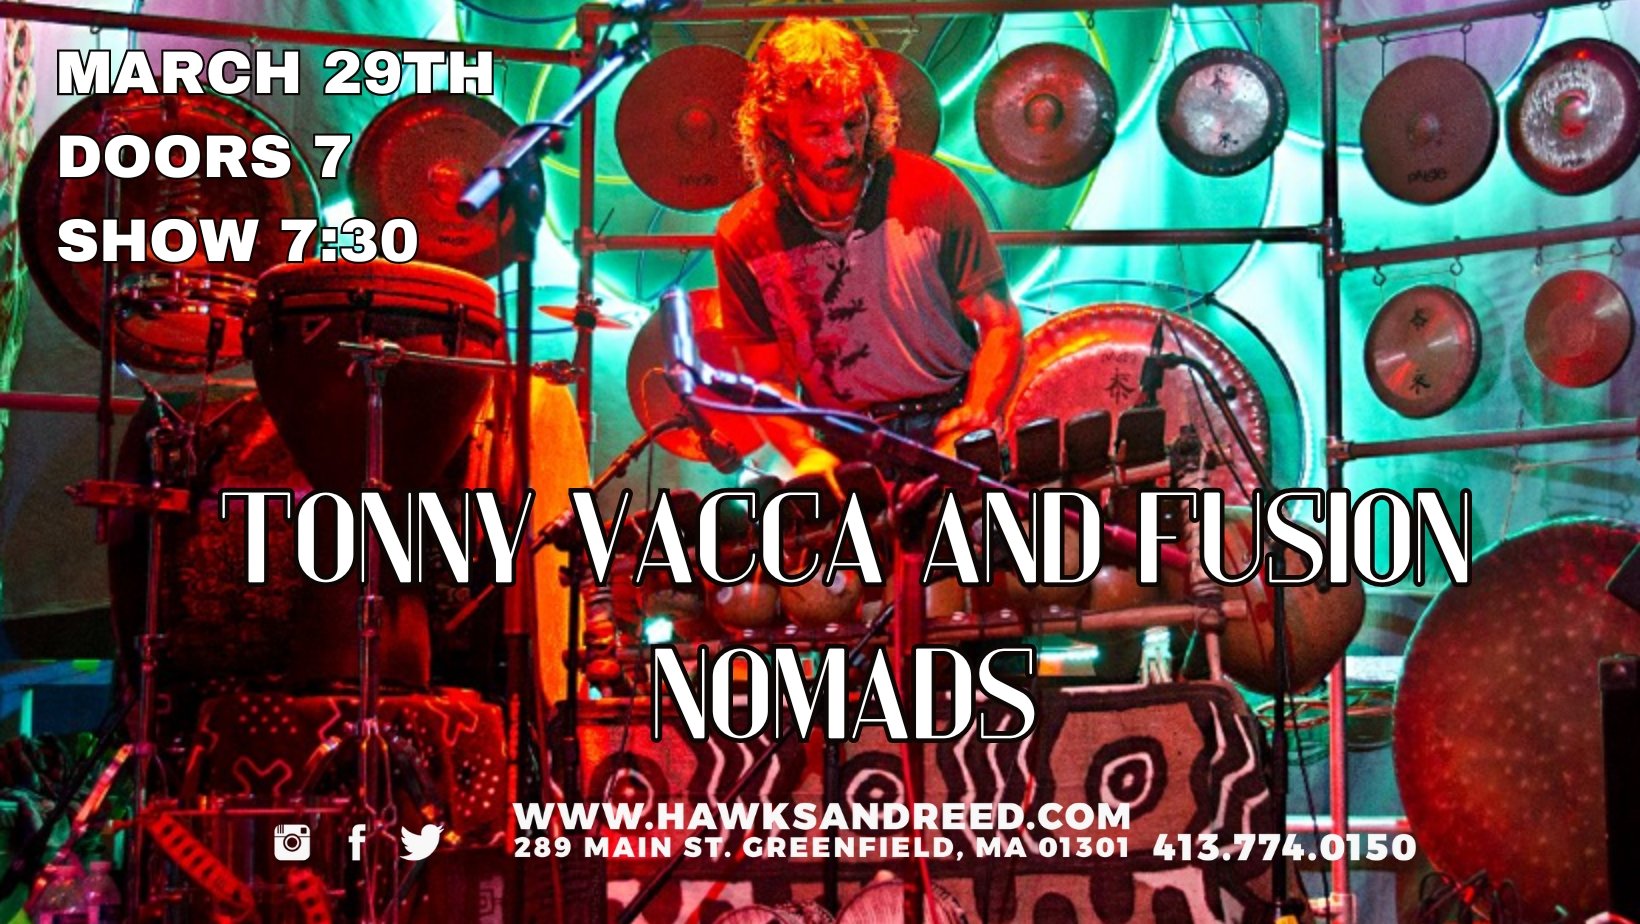 Tony Vacca and Fusion Nomads